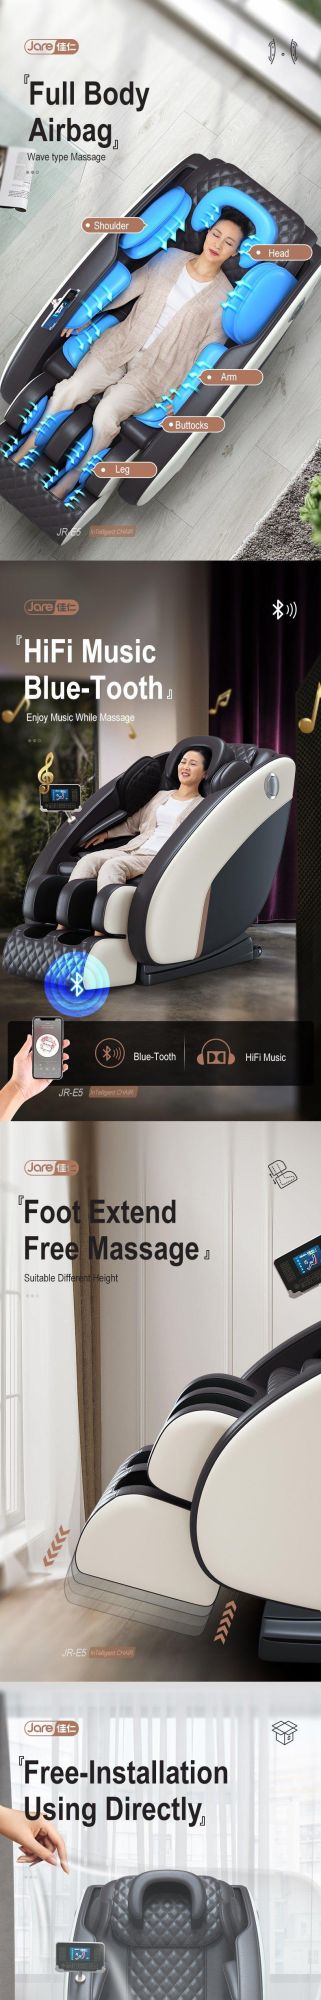 Buy Professional OEM/ODM Factory Price Blue-Tooth Full Body Massage Chair